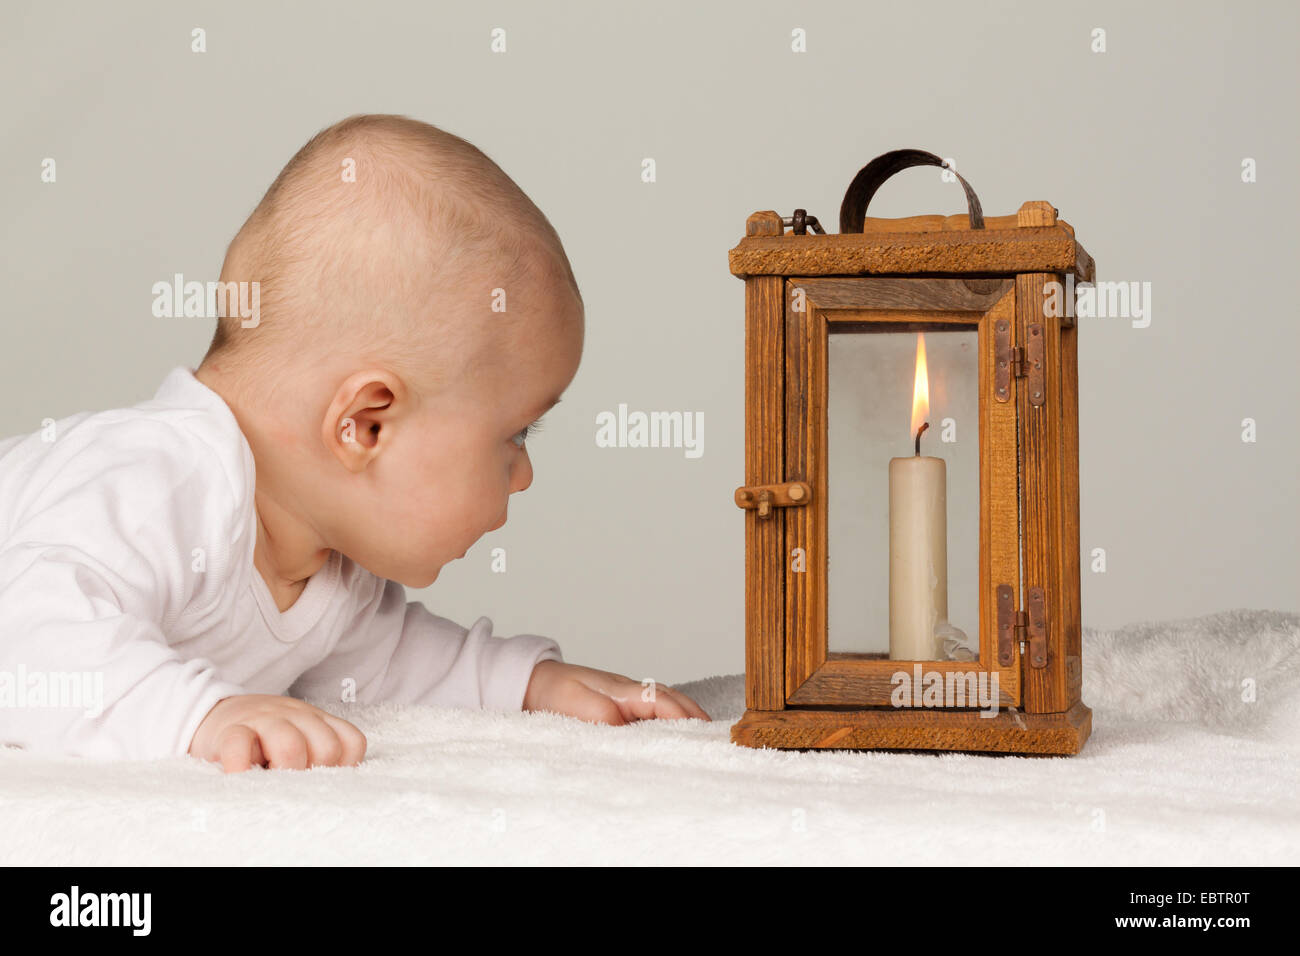 baby looking couriously at a burning candle Stock Photo